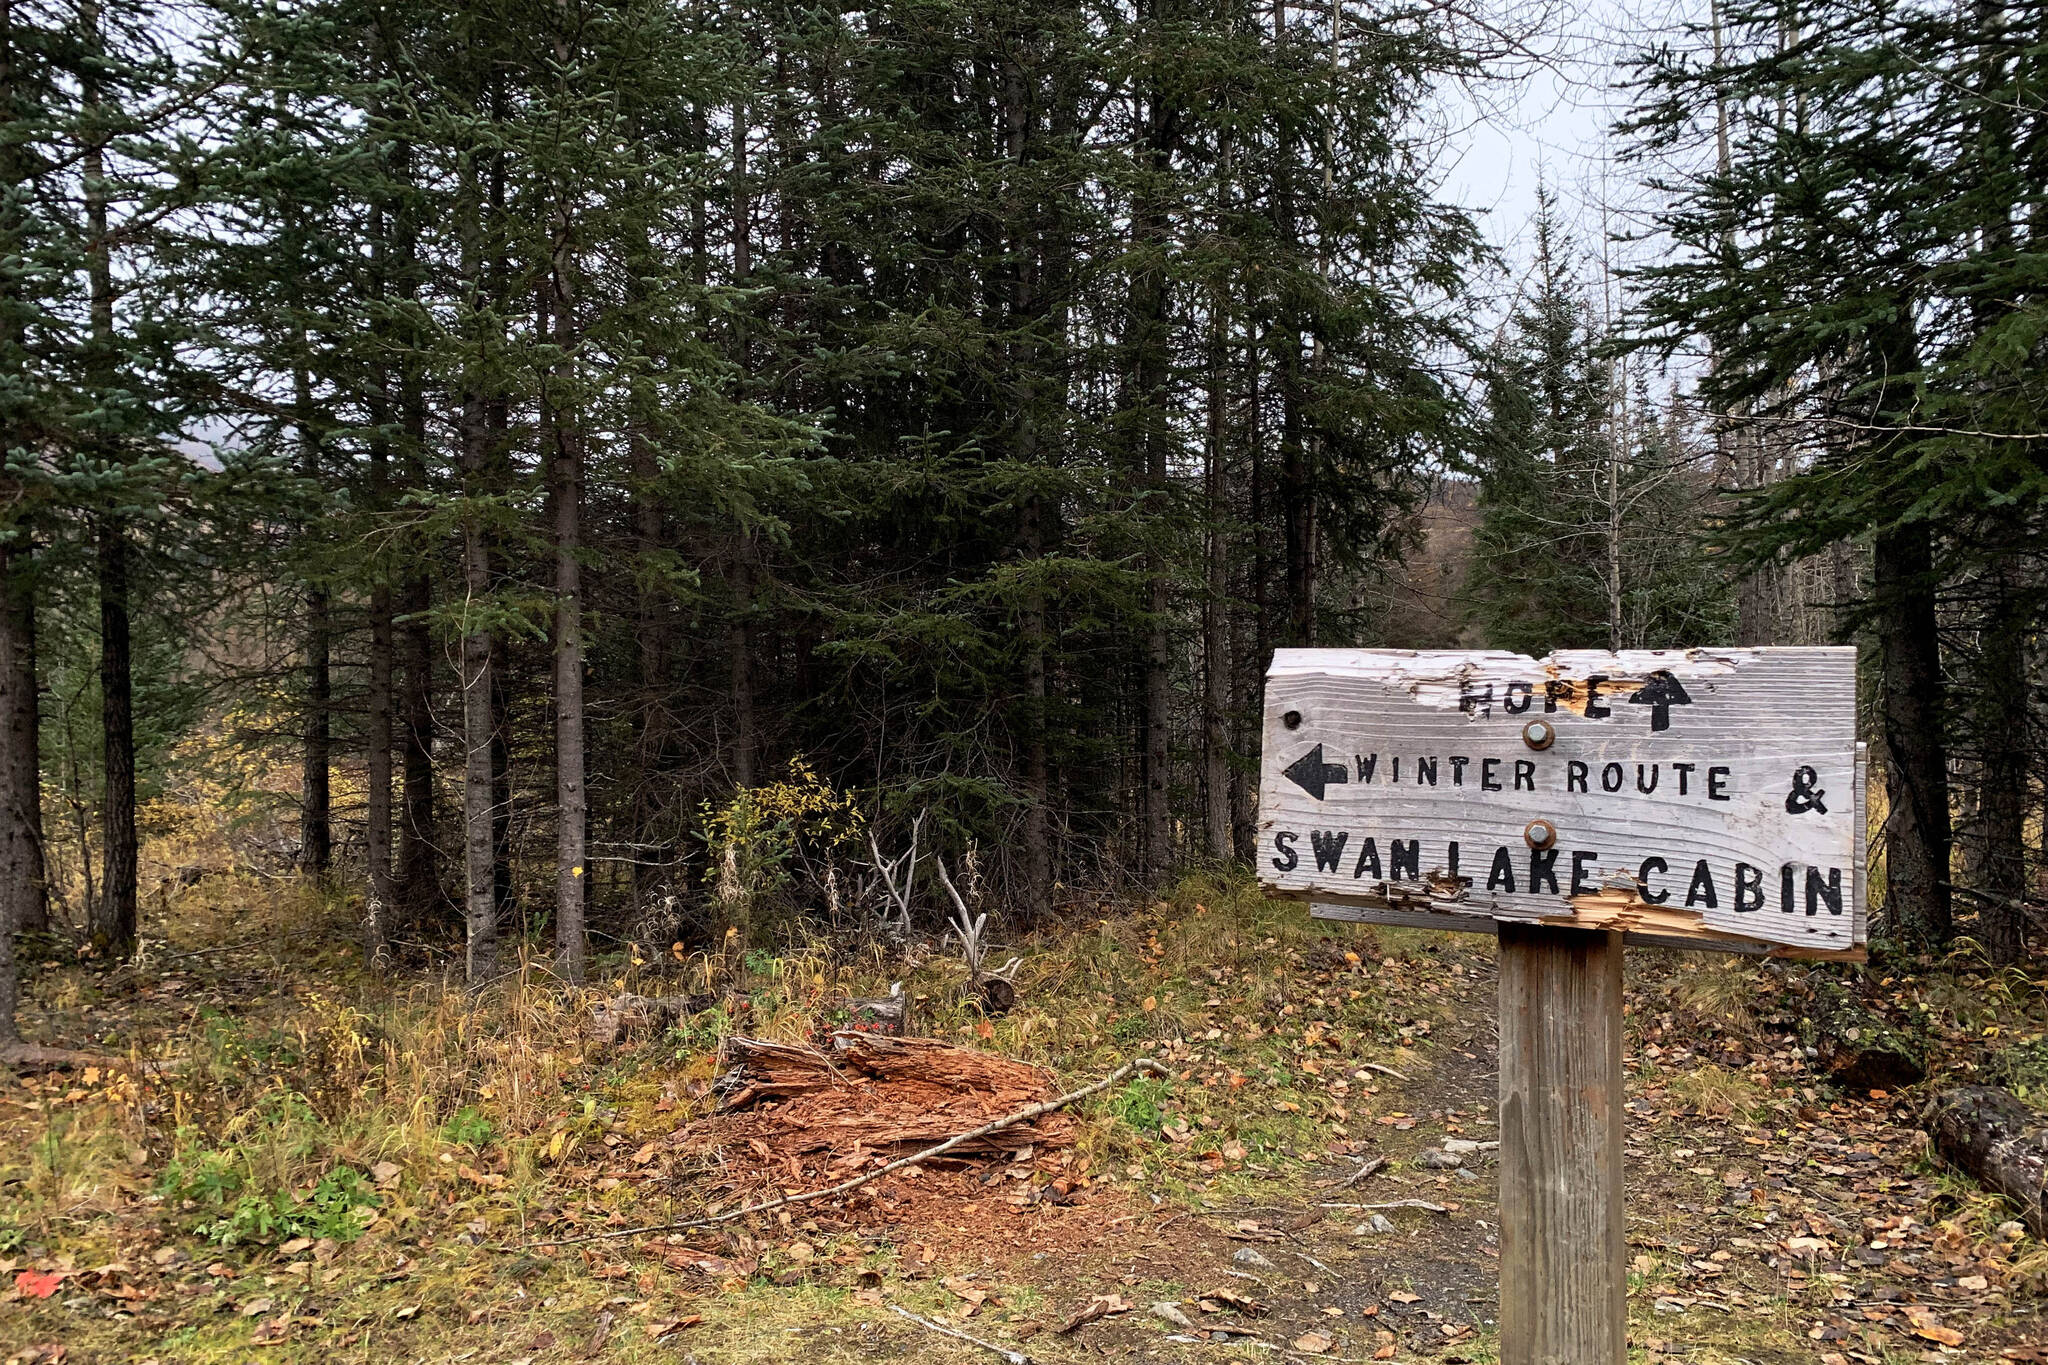 Signage points the way to the Swan Lake Cabin in the Chugach National Forest on Saturday, Oct. 1, 2022 near Cooper Landing, Alaska. (Ashlyn O’Hara/Peninsula Clarion)